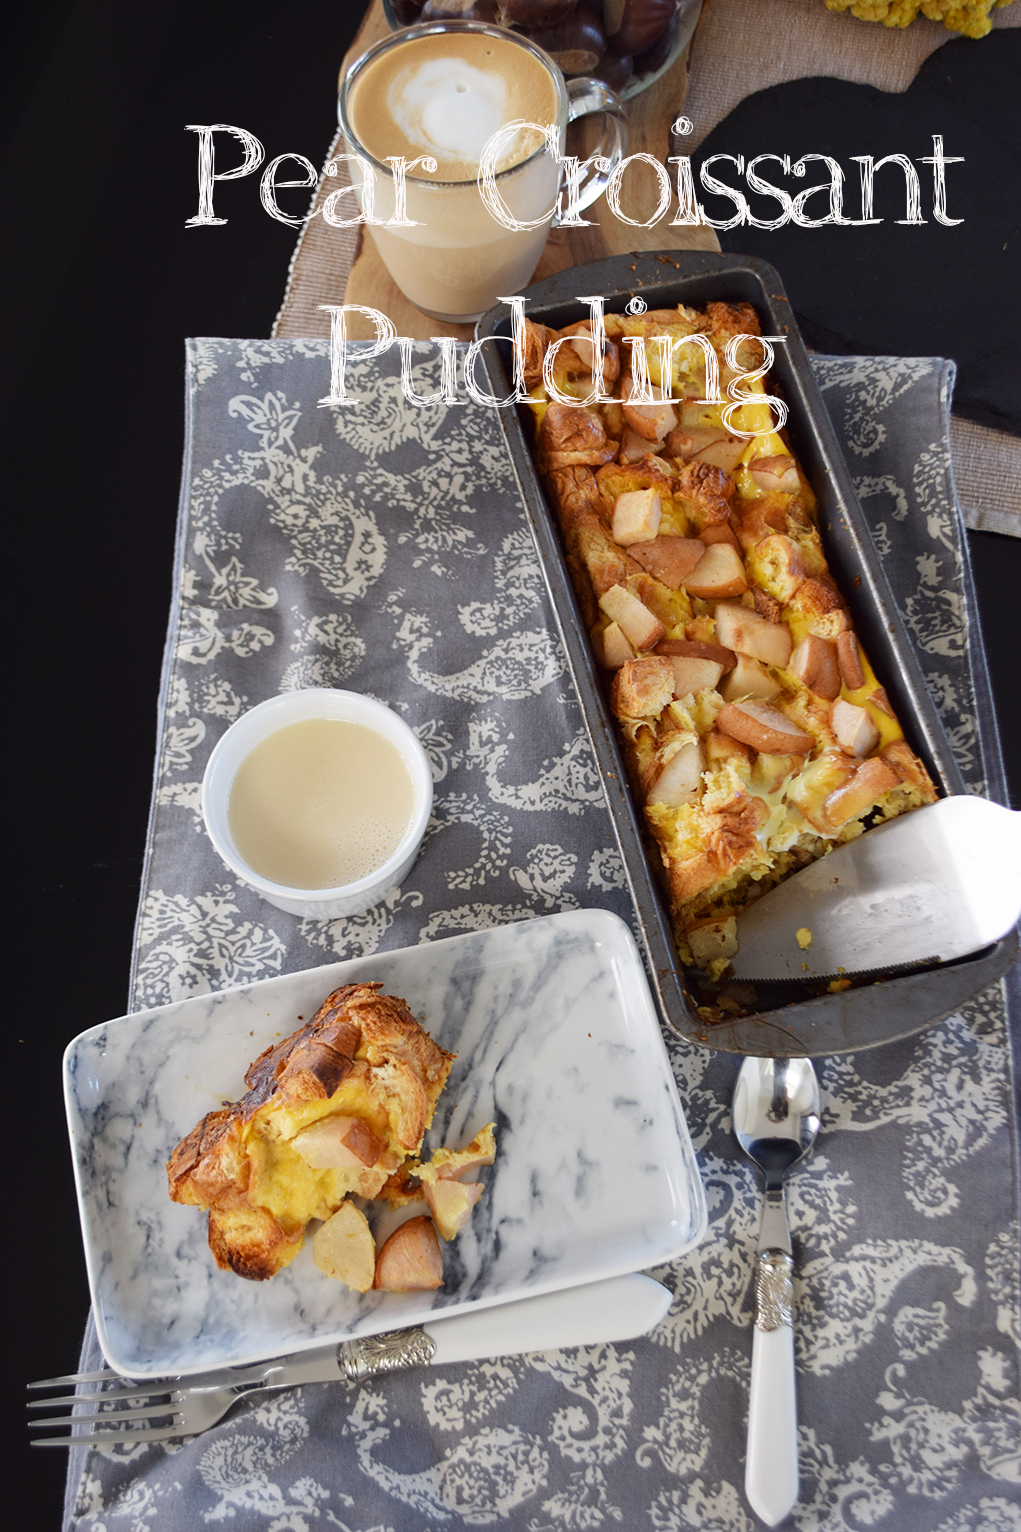 An alternative pudding with the fine taste of pear